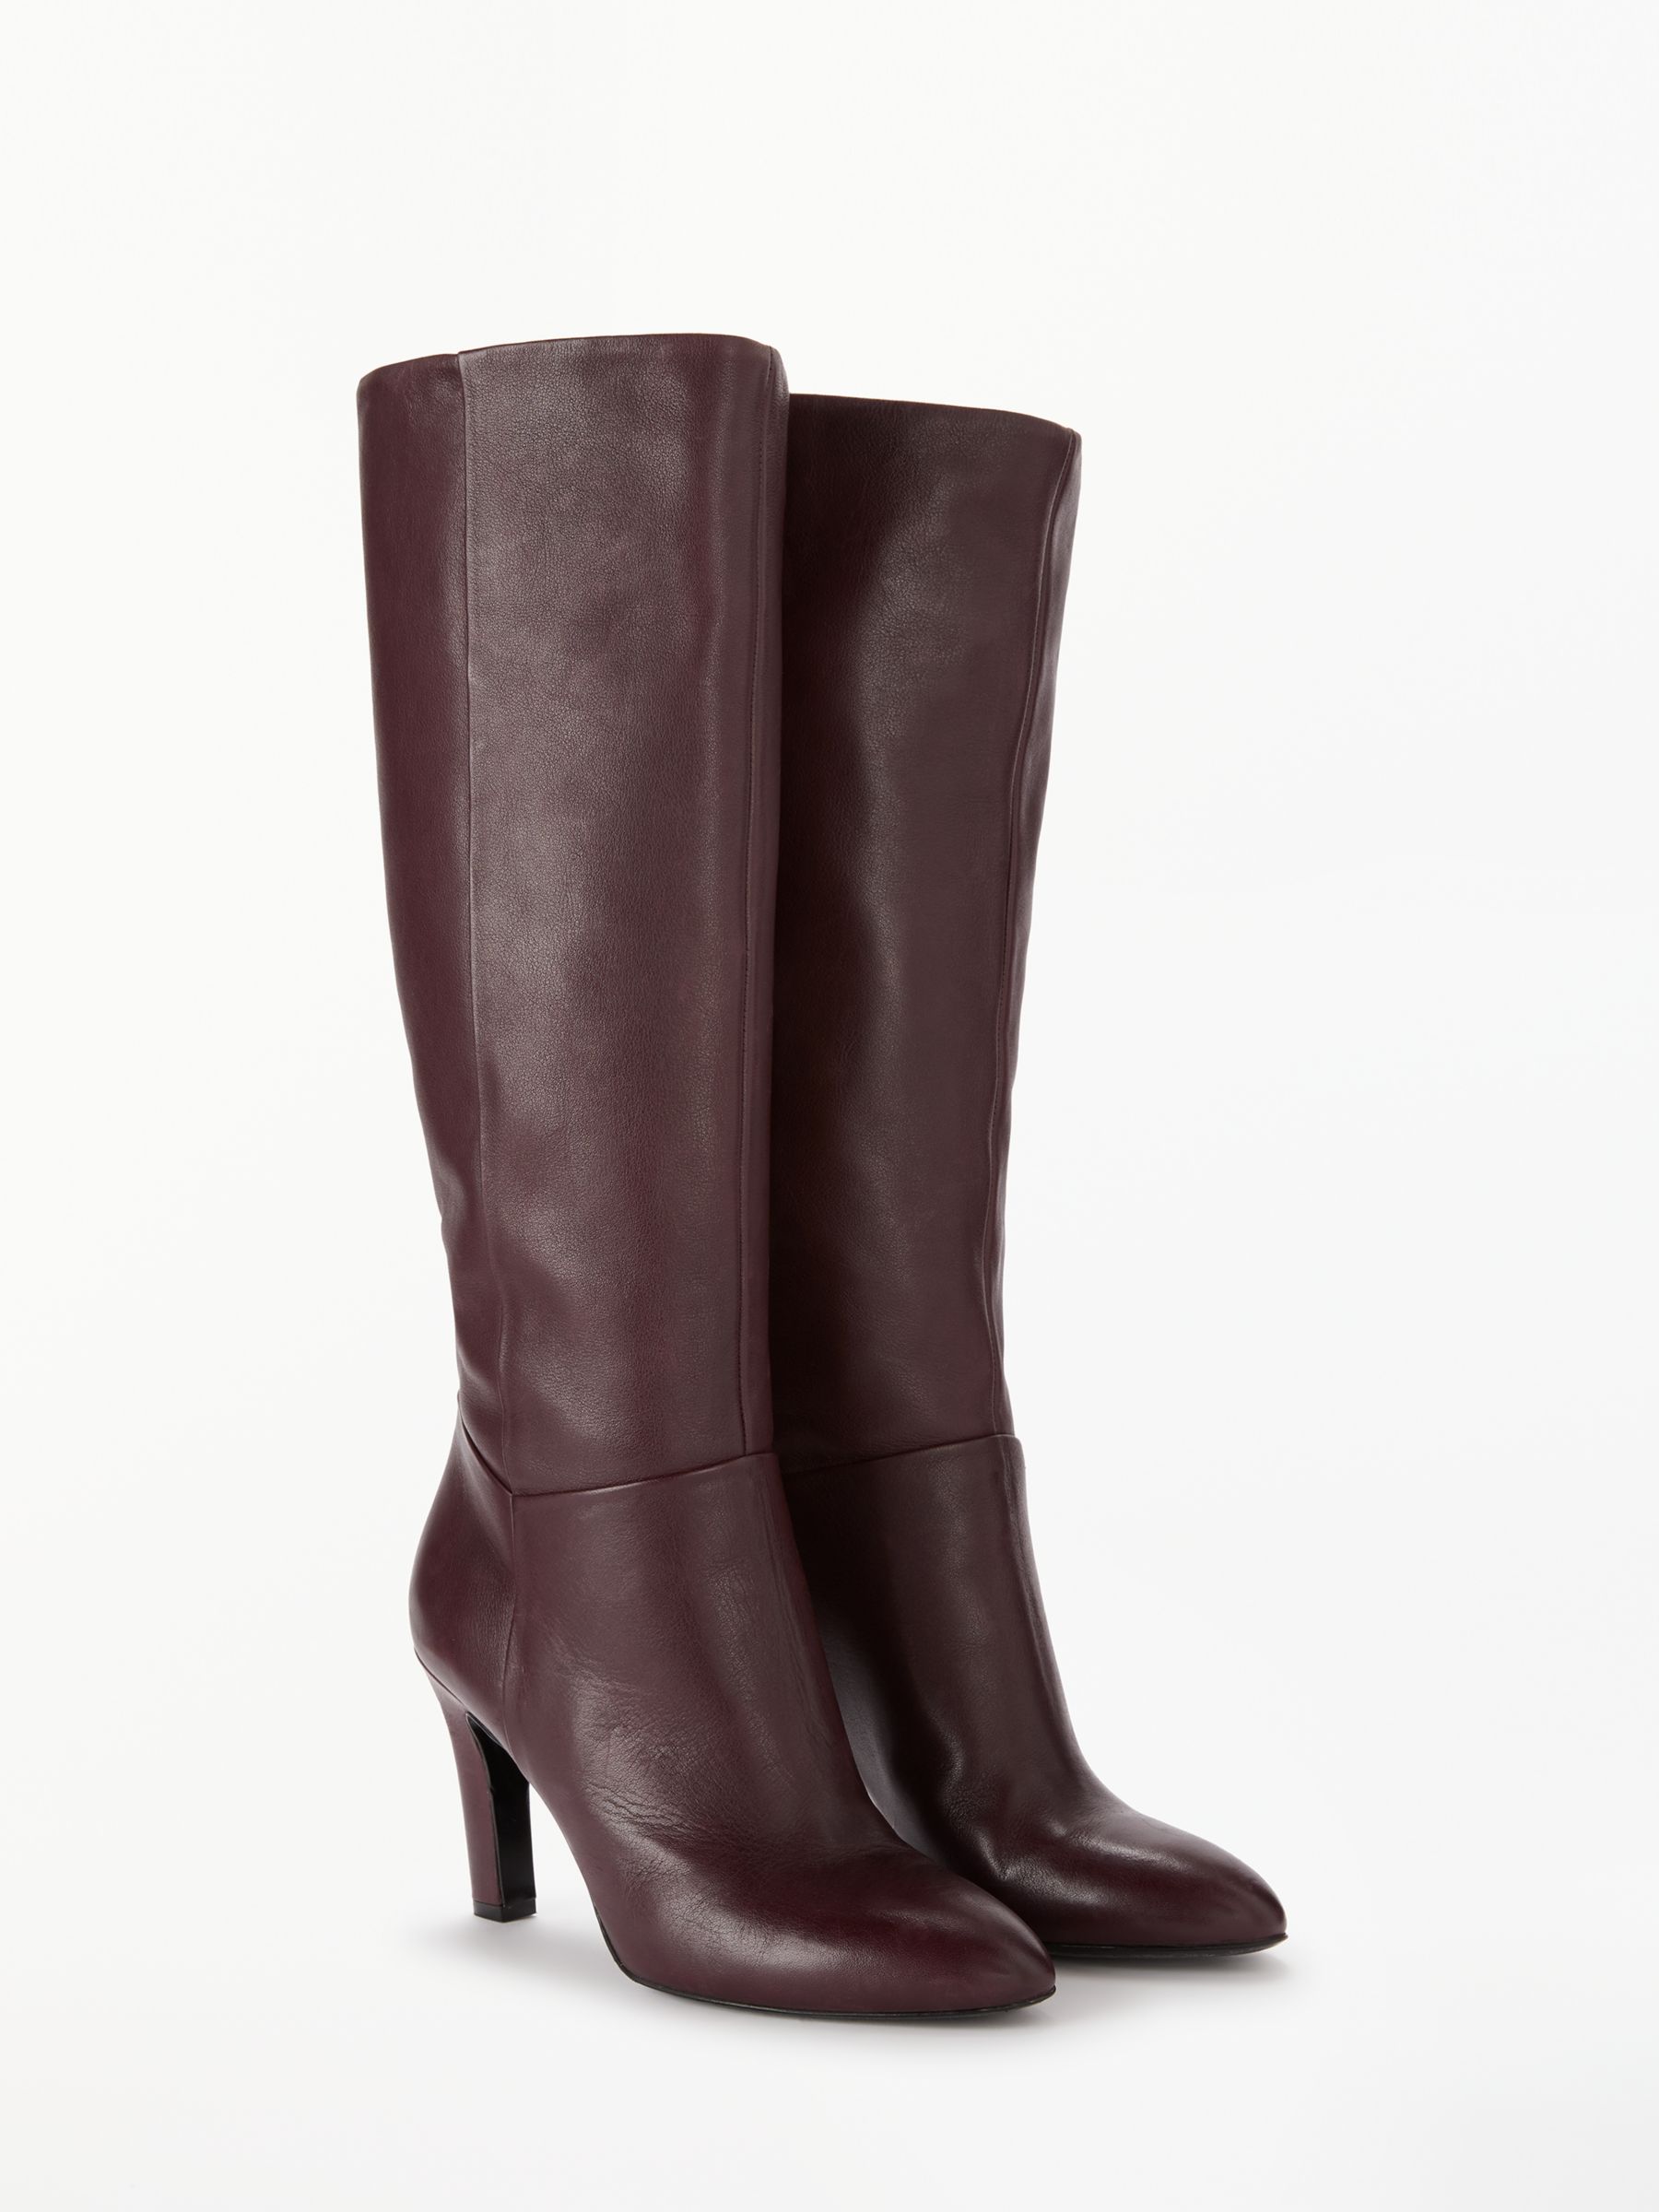 knee high burgundy leather boots